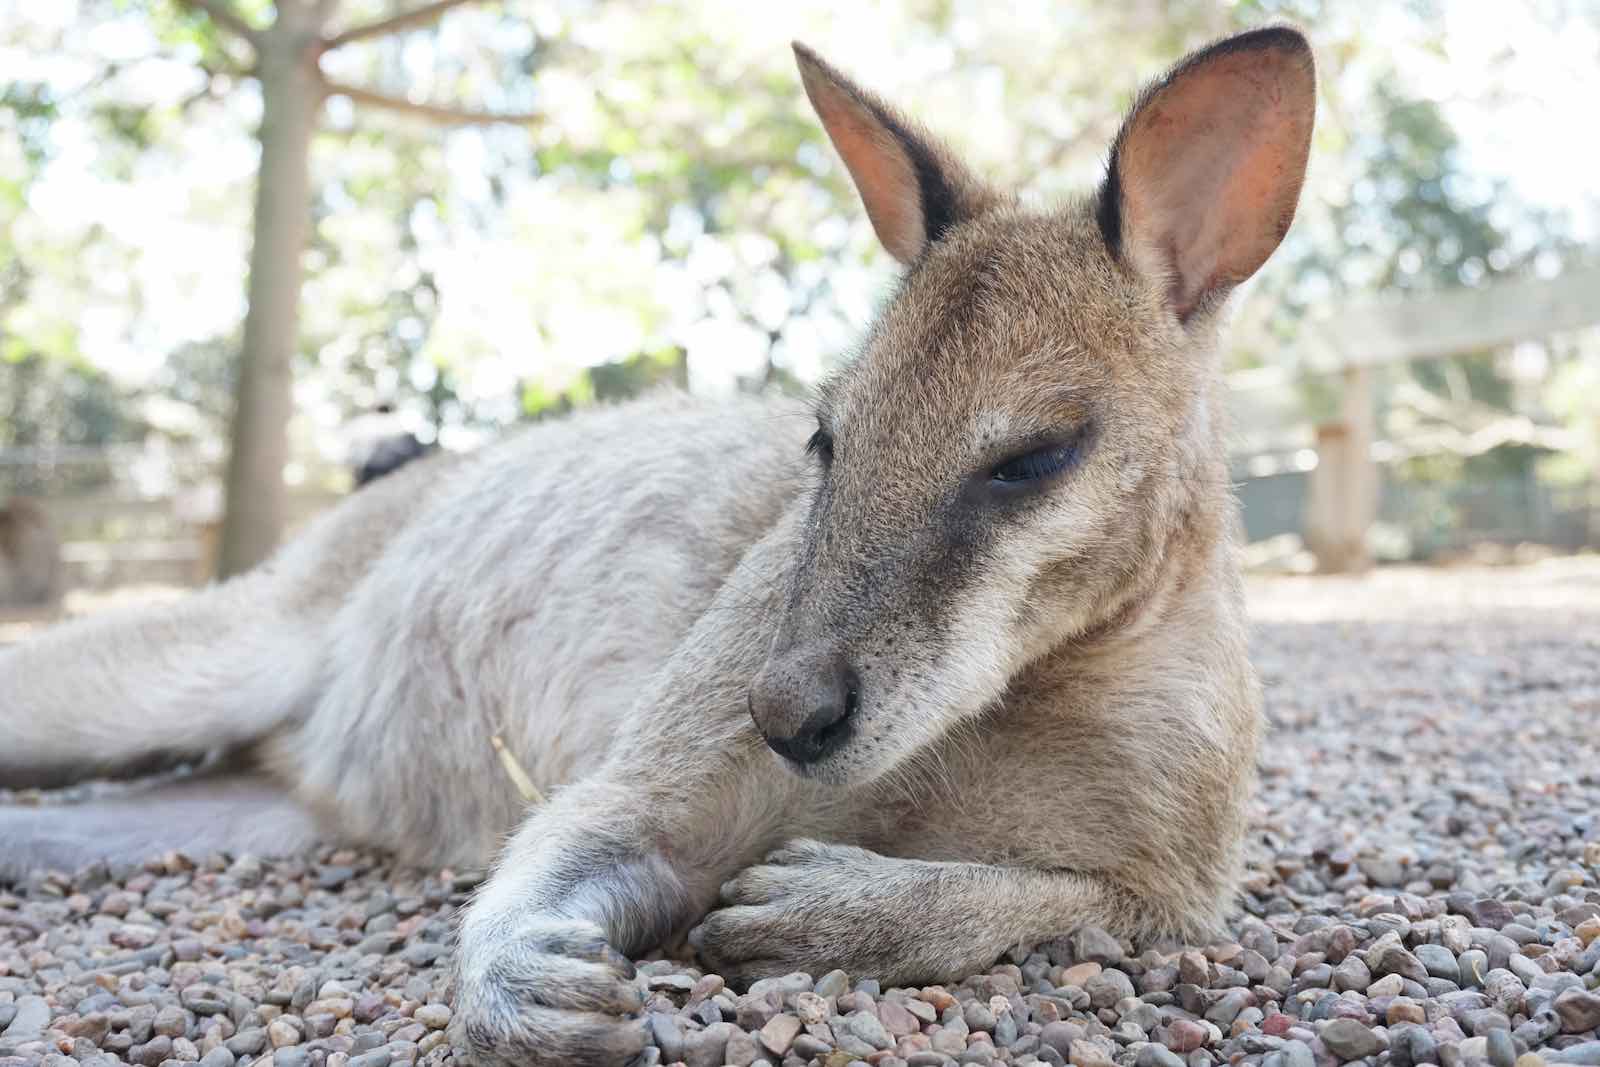 Made friends with this suave wallaby, and spent a good 20 minutes petting him. I think these are my new favorite animals now.